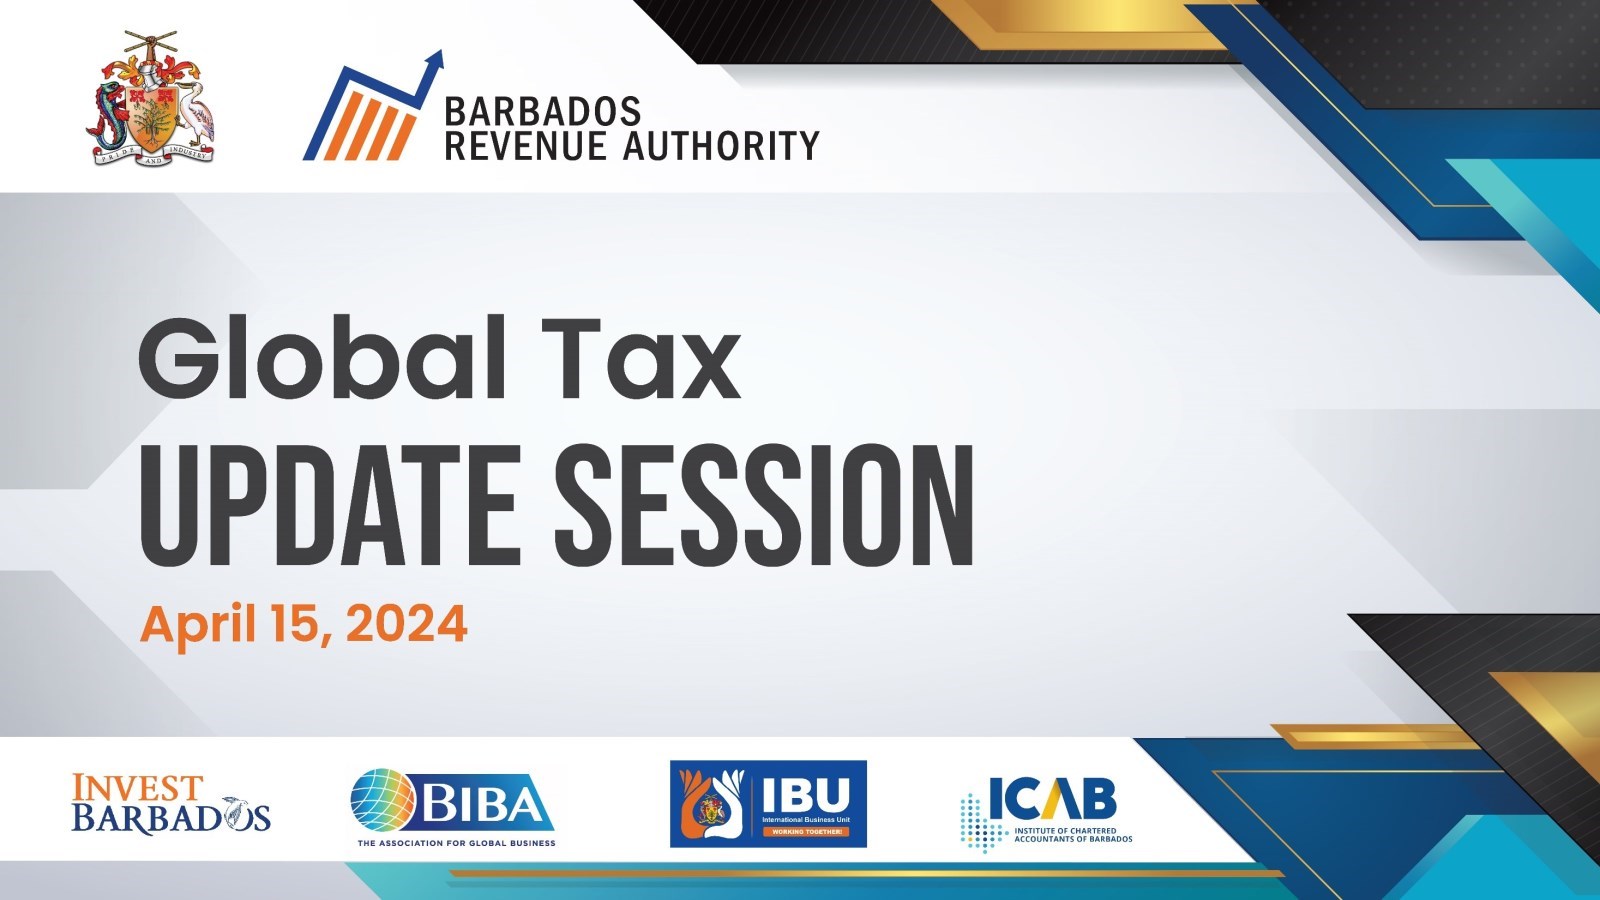 Authority to Host Global Tax Update Event